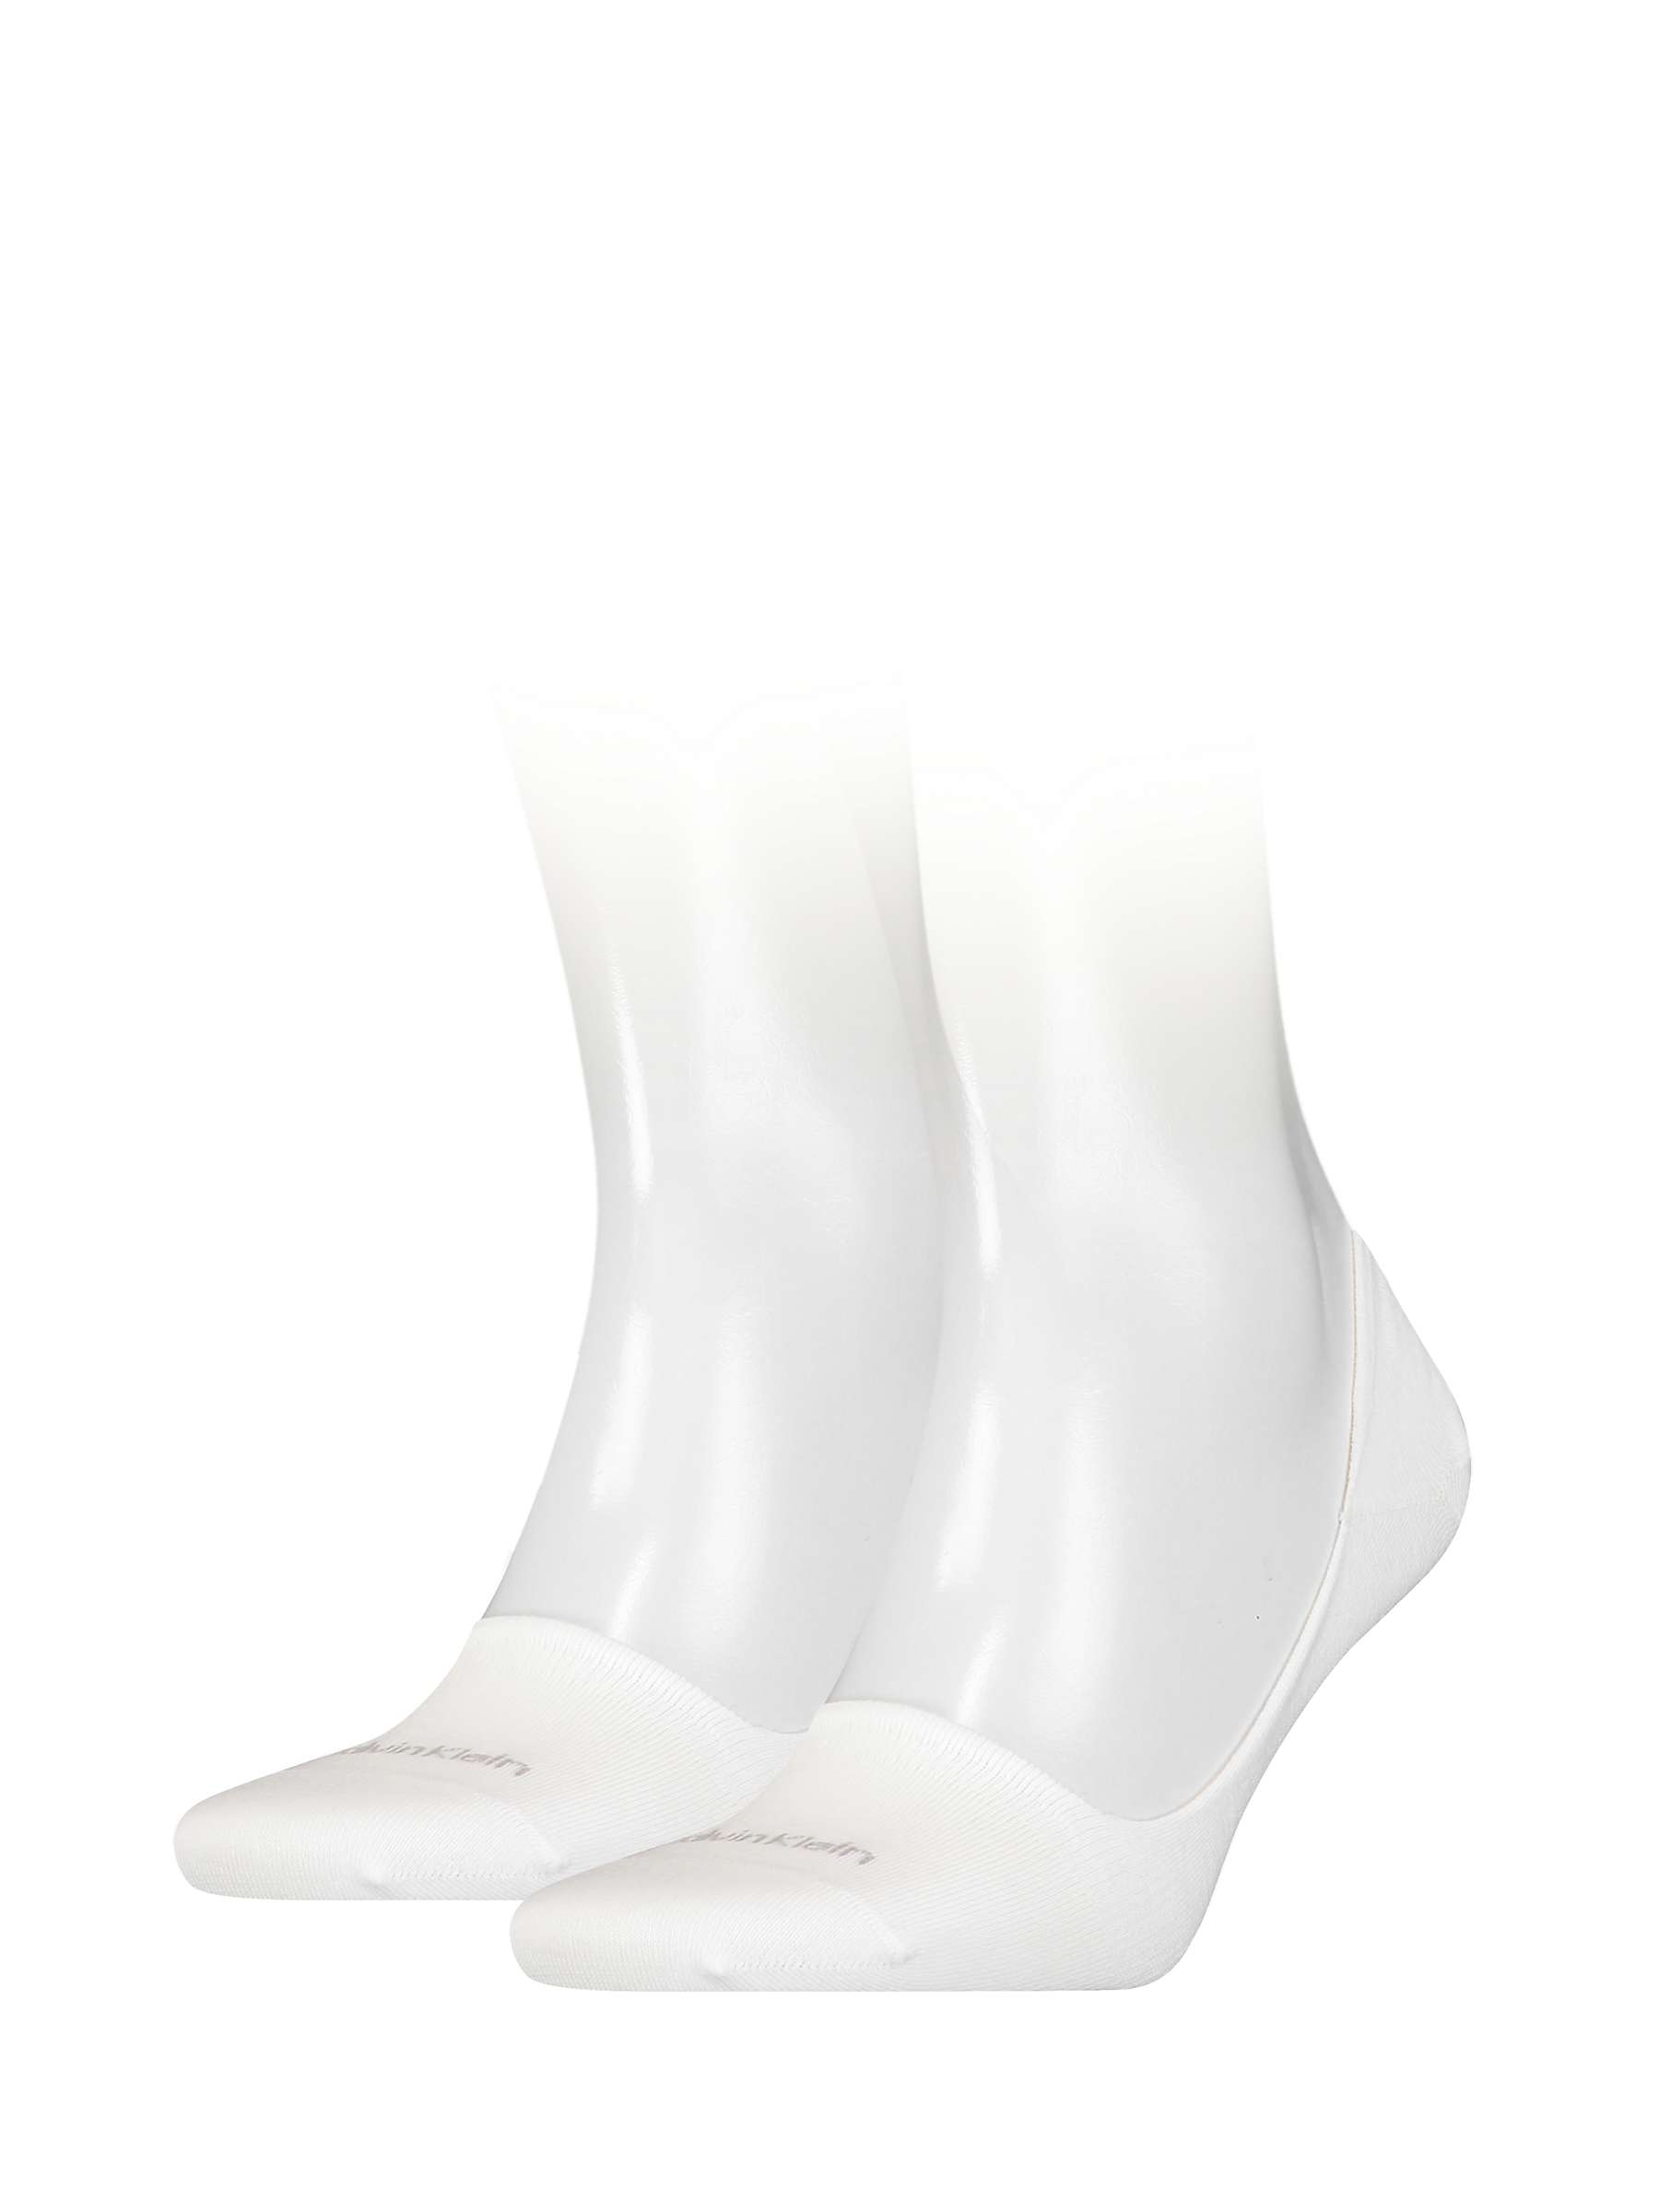 Buy Calvin Klein Invisible Trainer Liner Cotton Socks, Pack of 2 Online at johnlewis.com